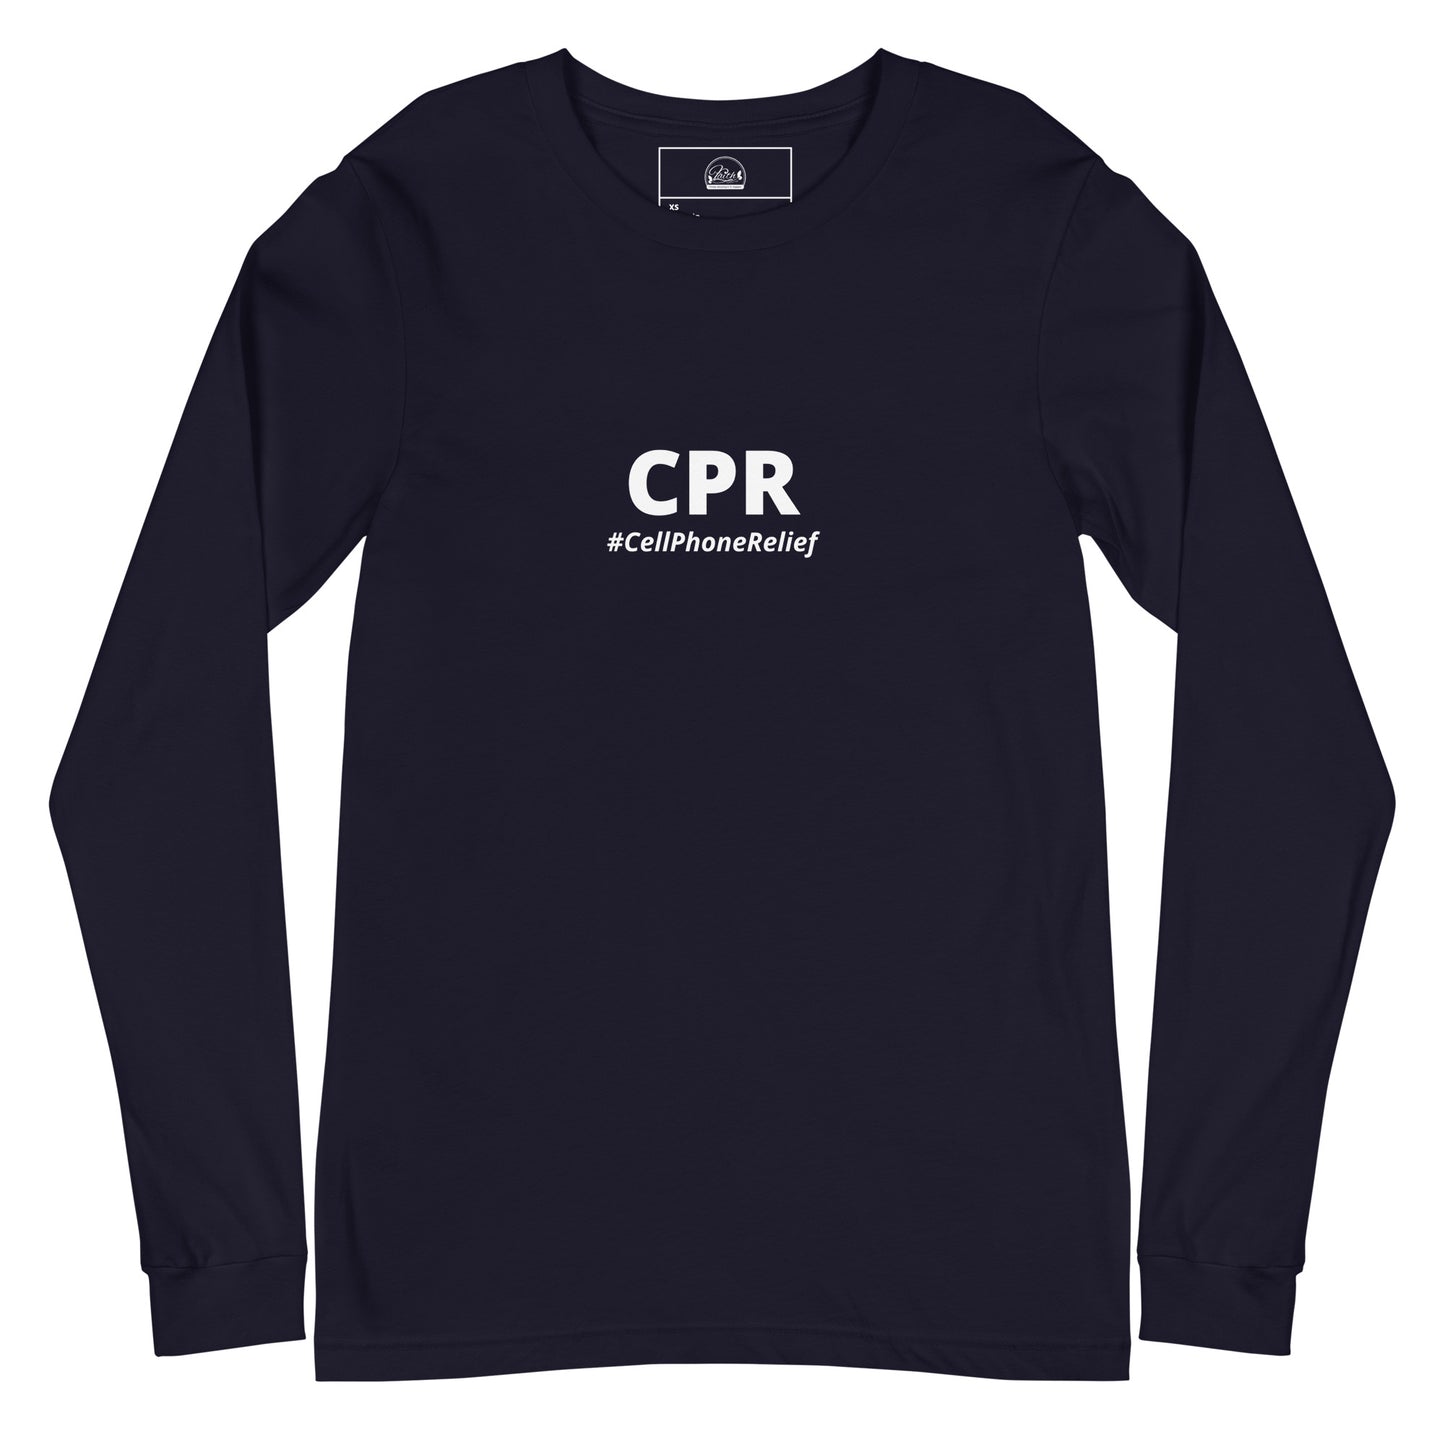 CPR (Cell Phone Relief) Unisex Long Sleeve Tee